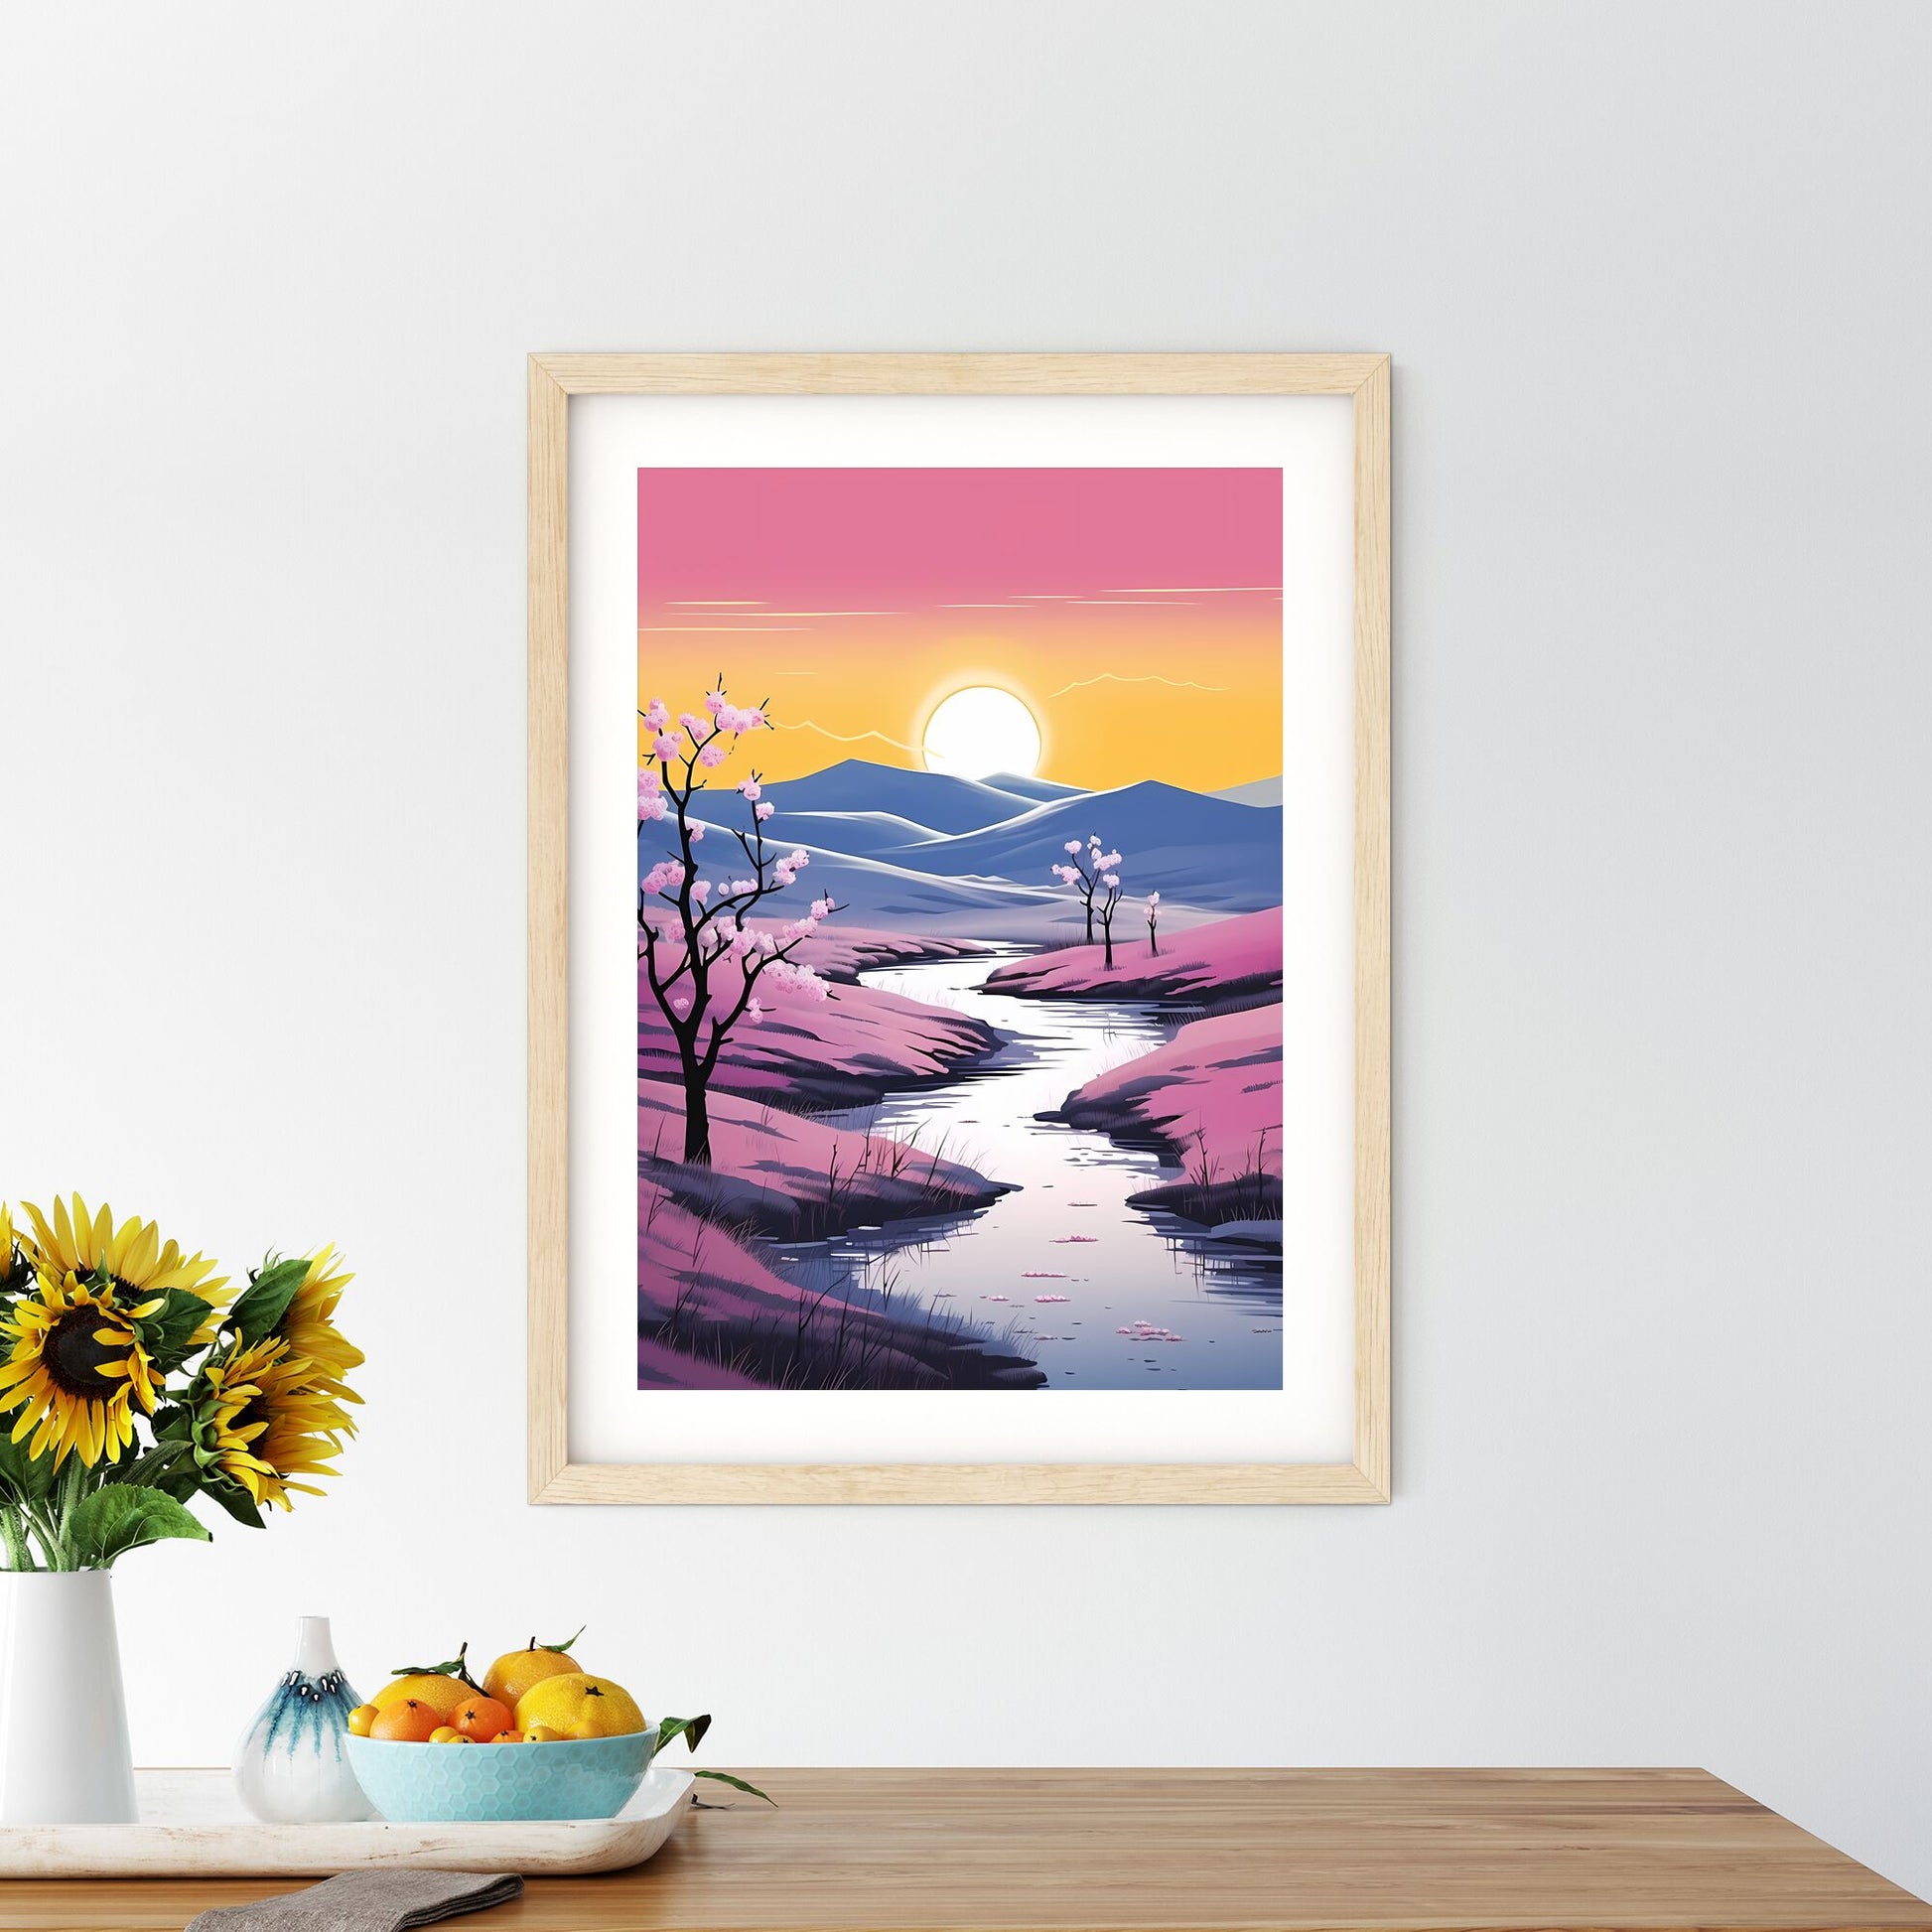 River Running Through A Valley With Pink Flowers Art Print Default Title